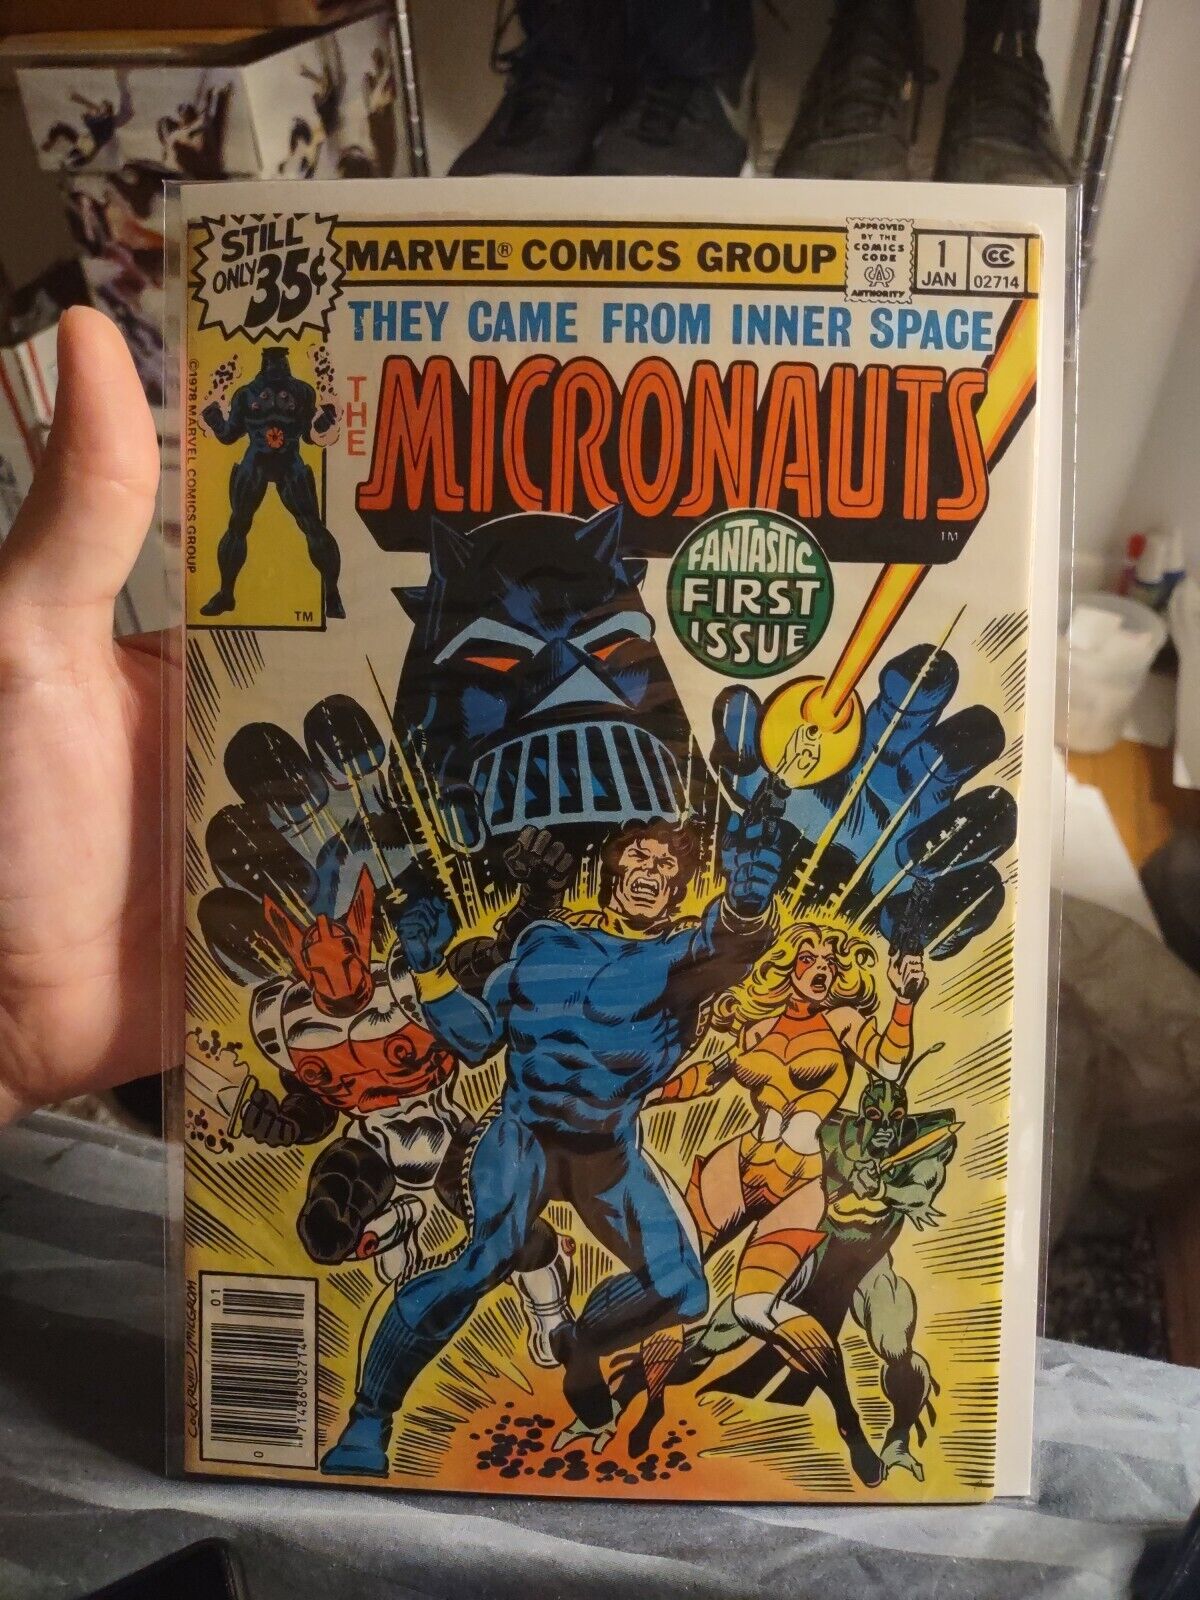 MICRONAUTS # 1 MARVEL COMICS January 1979 MEGO TOY LINE TIE-IN 1st APPEARANCE